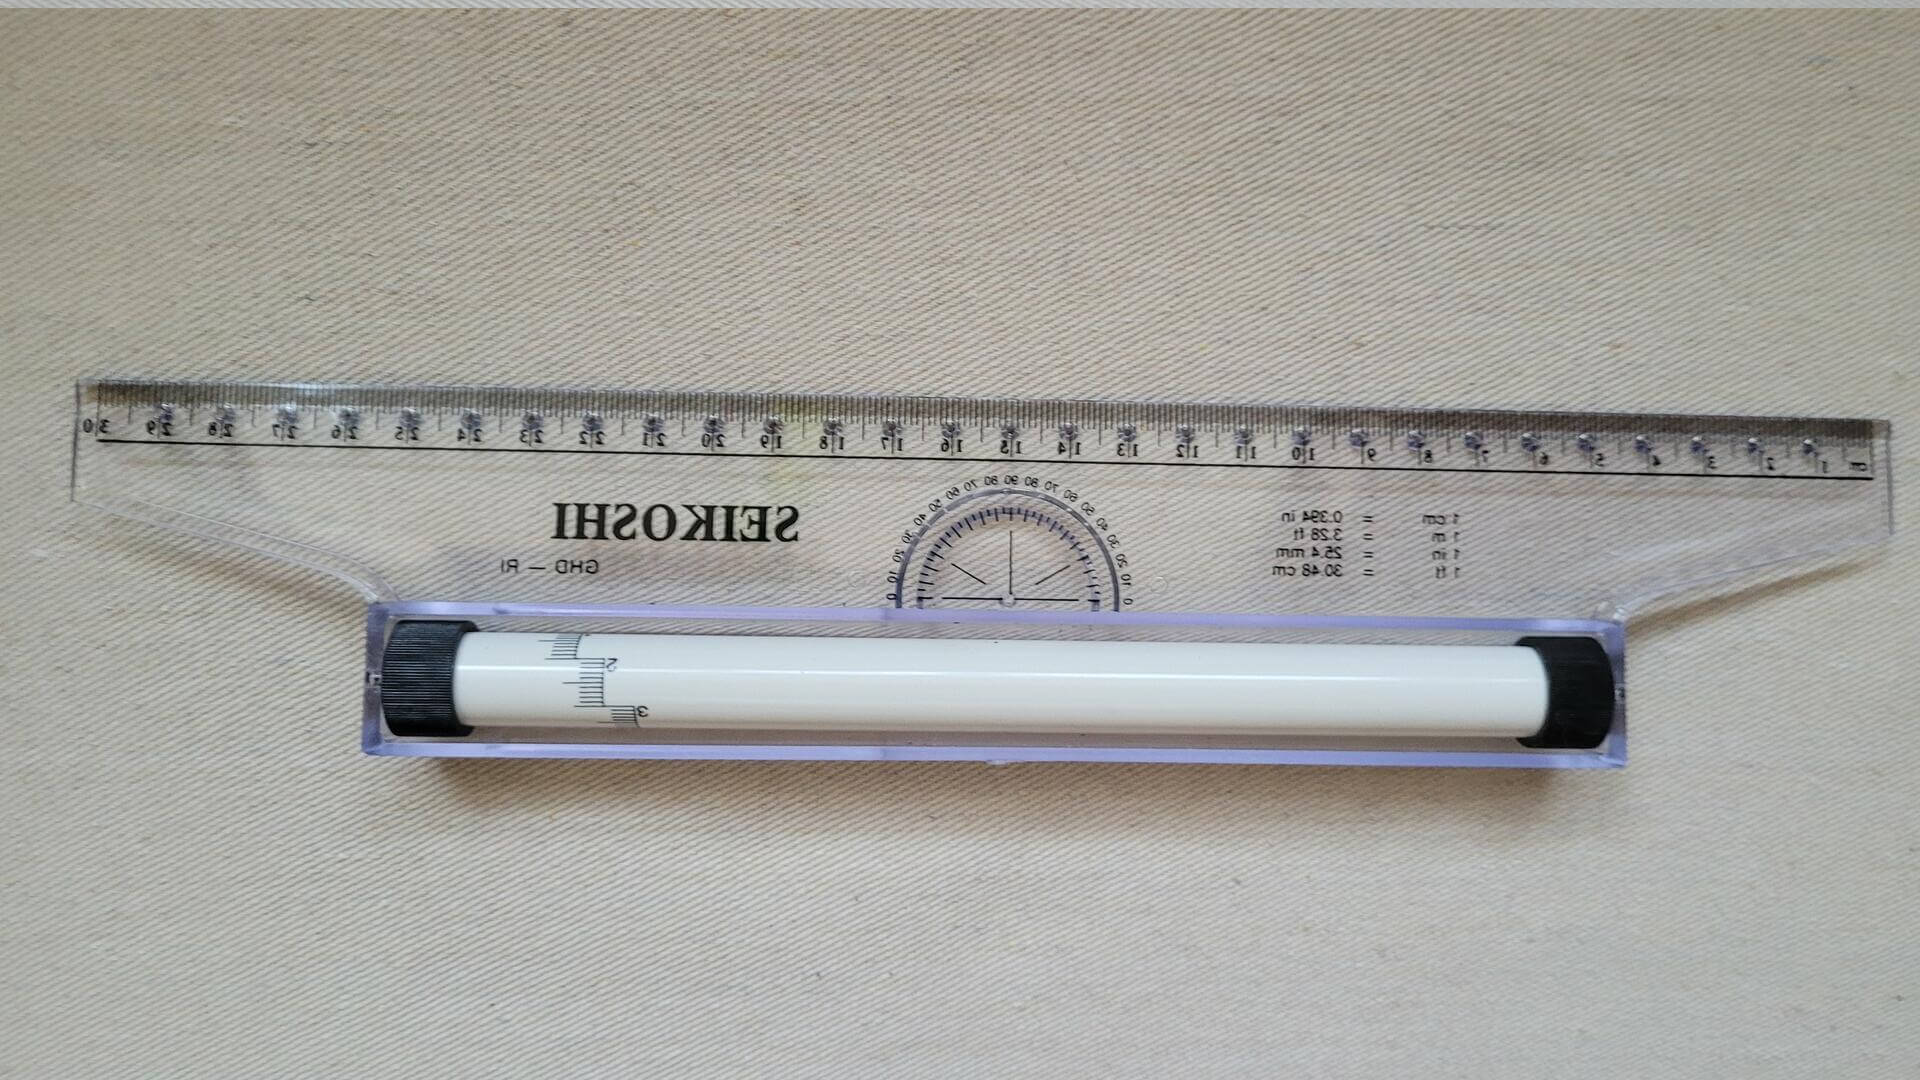 Vintage Sekoshi parallel rolling ruler with metric balancing scale 30 cm long. Made in Japan art, architectural, drawing, and lettering collectible tool used for drawing vertical and parallel lines, charts and graphs, 3D drawings, angles, horizontal lines, circles, musical notes and more.